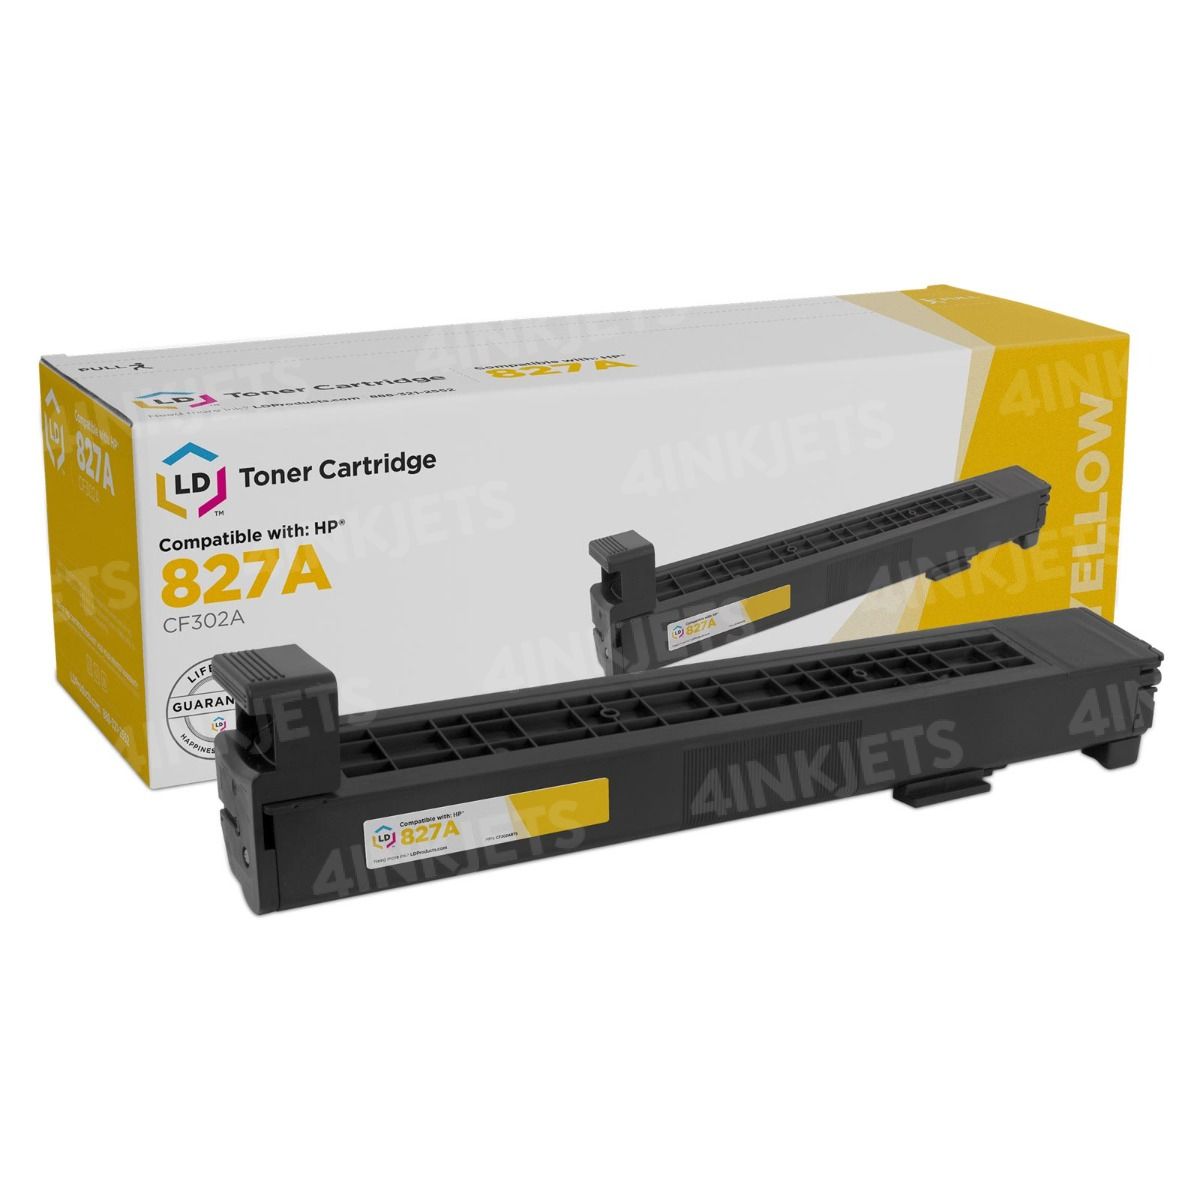 HP 827A Yellow Toner Best-Selling Remanufactured Cartridge! 4inkjets